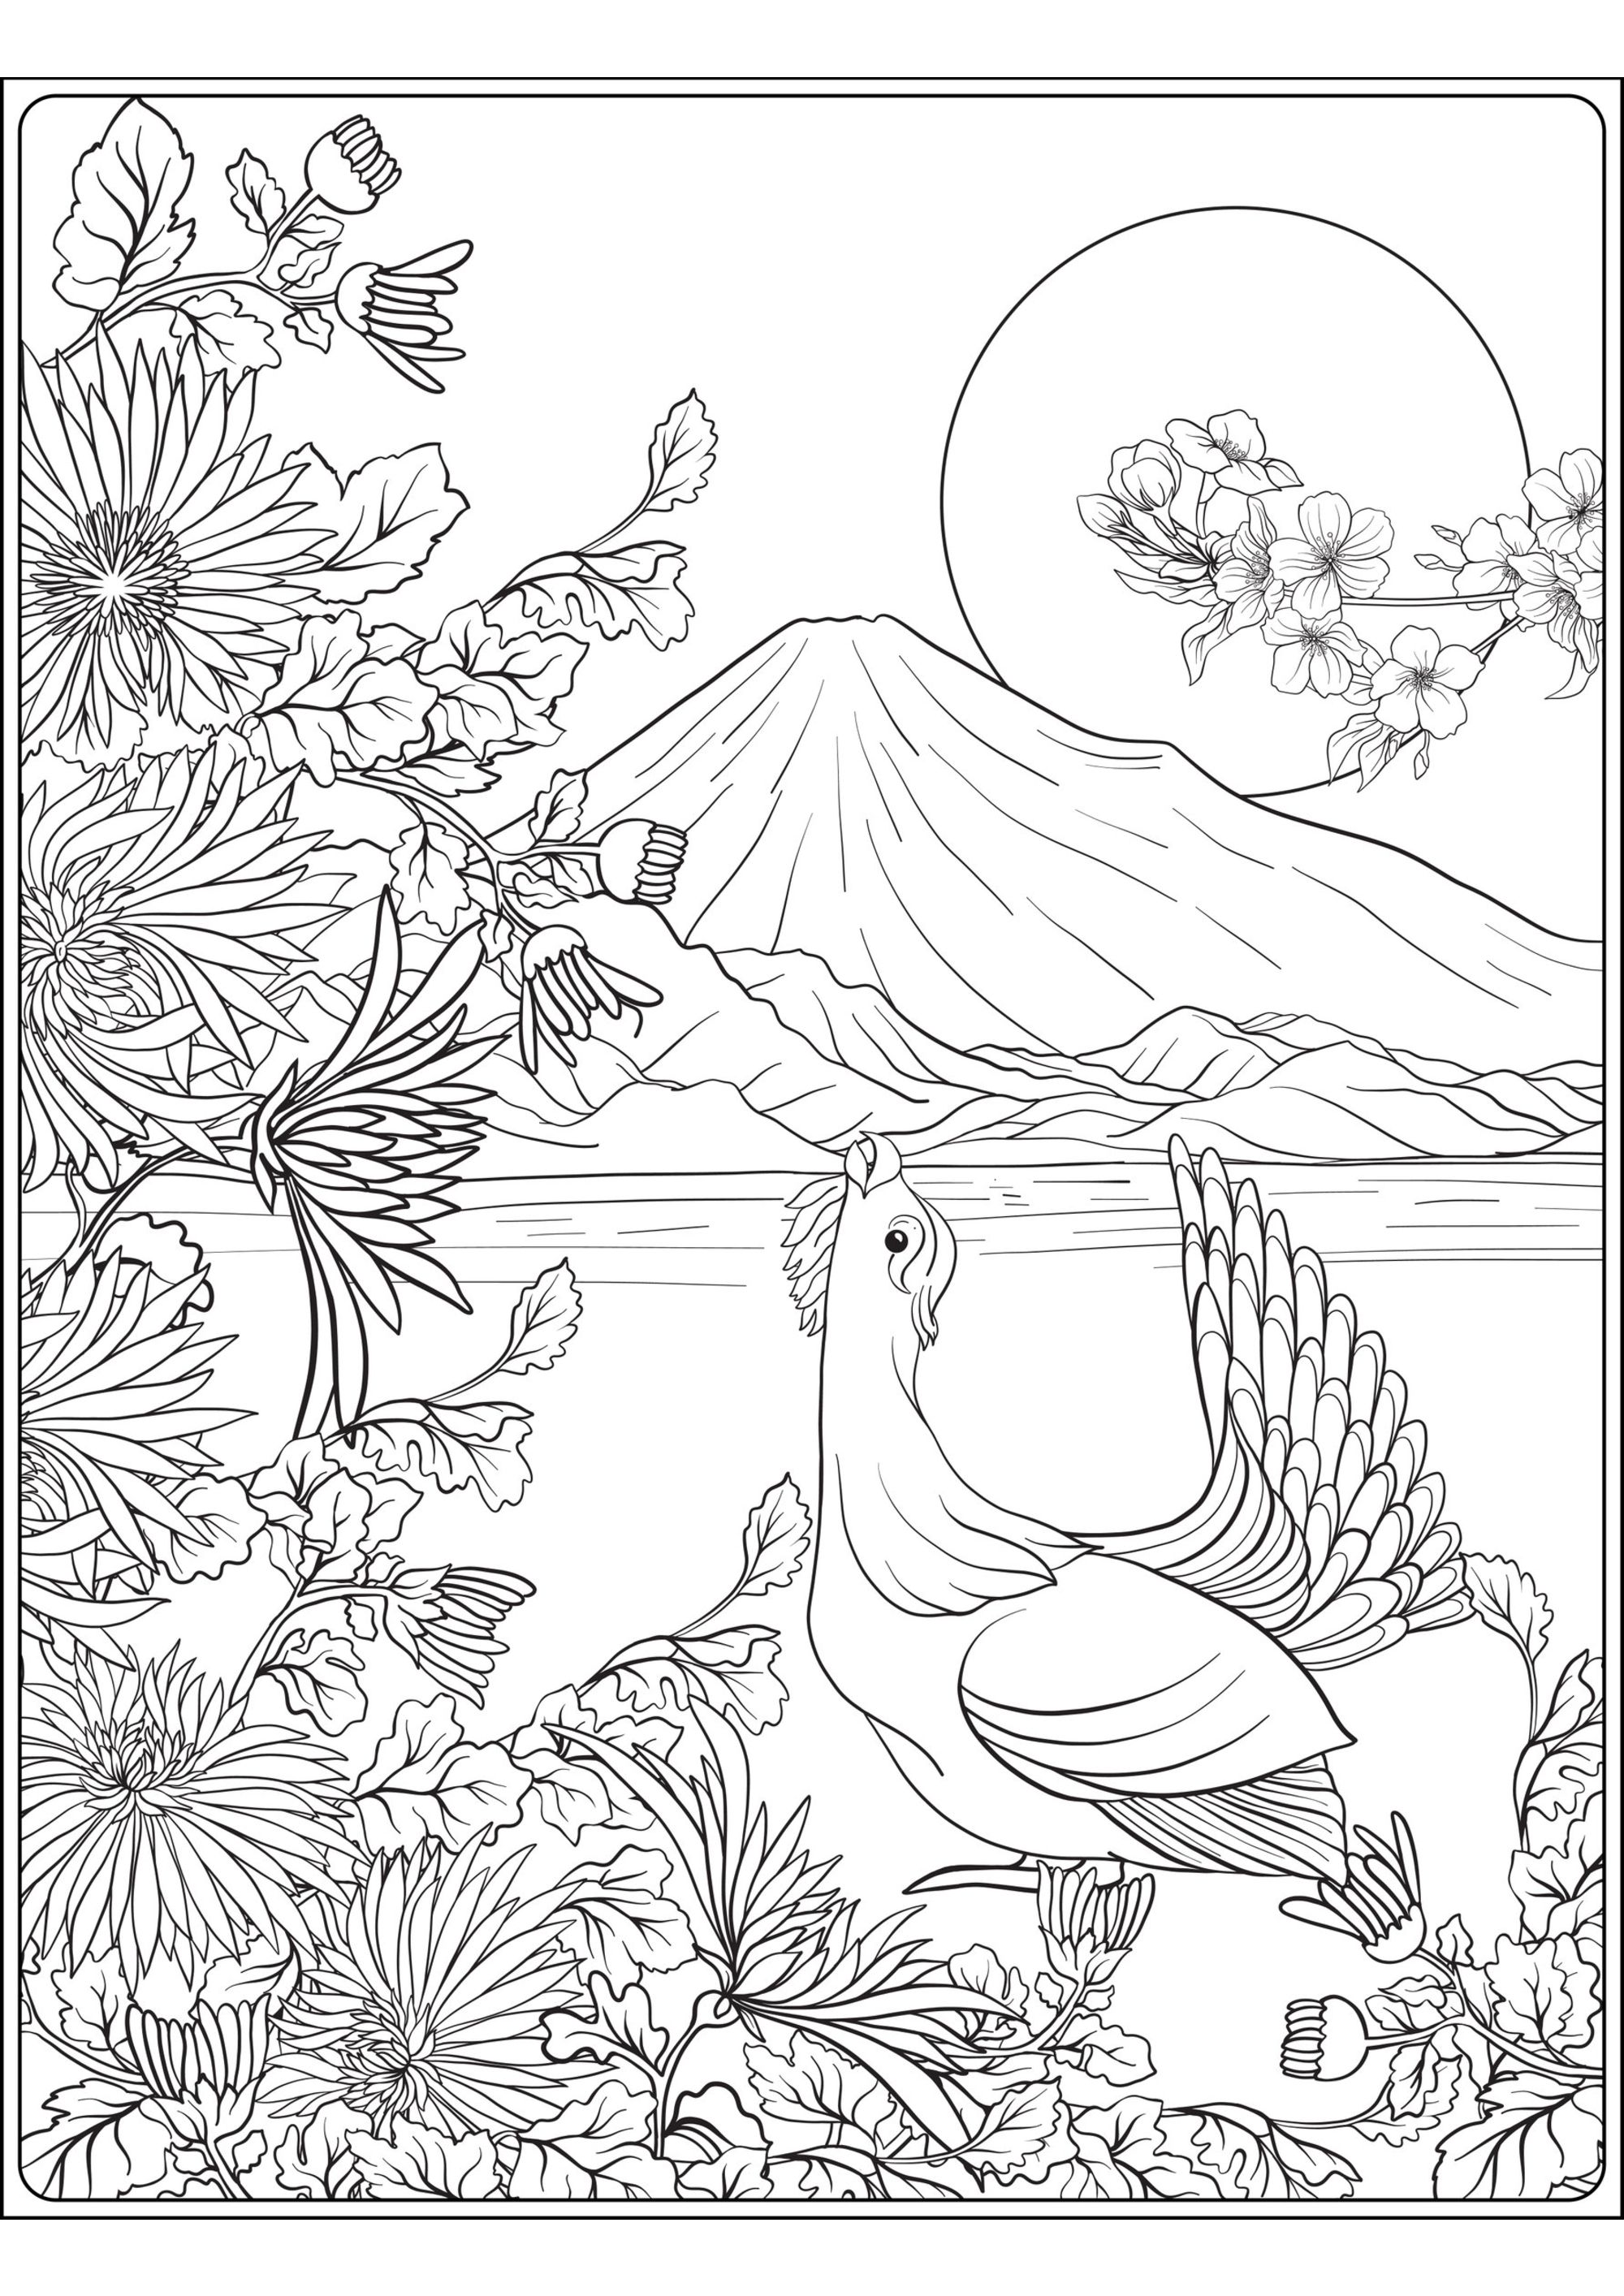 Mount Fuji and bird. A superb coloring page on the theme of Japan, with a bird, Mount Fuji, and a foreground filled with pretty plants and flowers, Artist : Elena Besedina   Source : 123rf